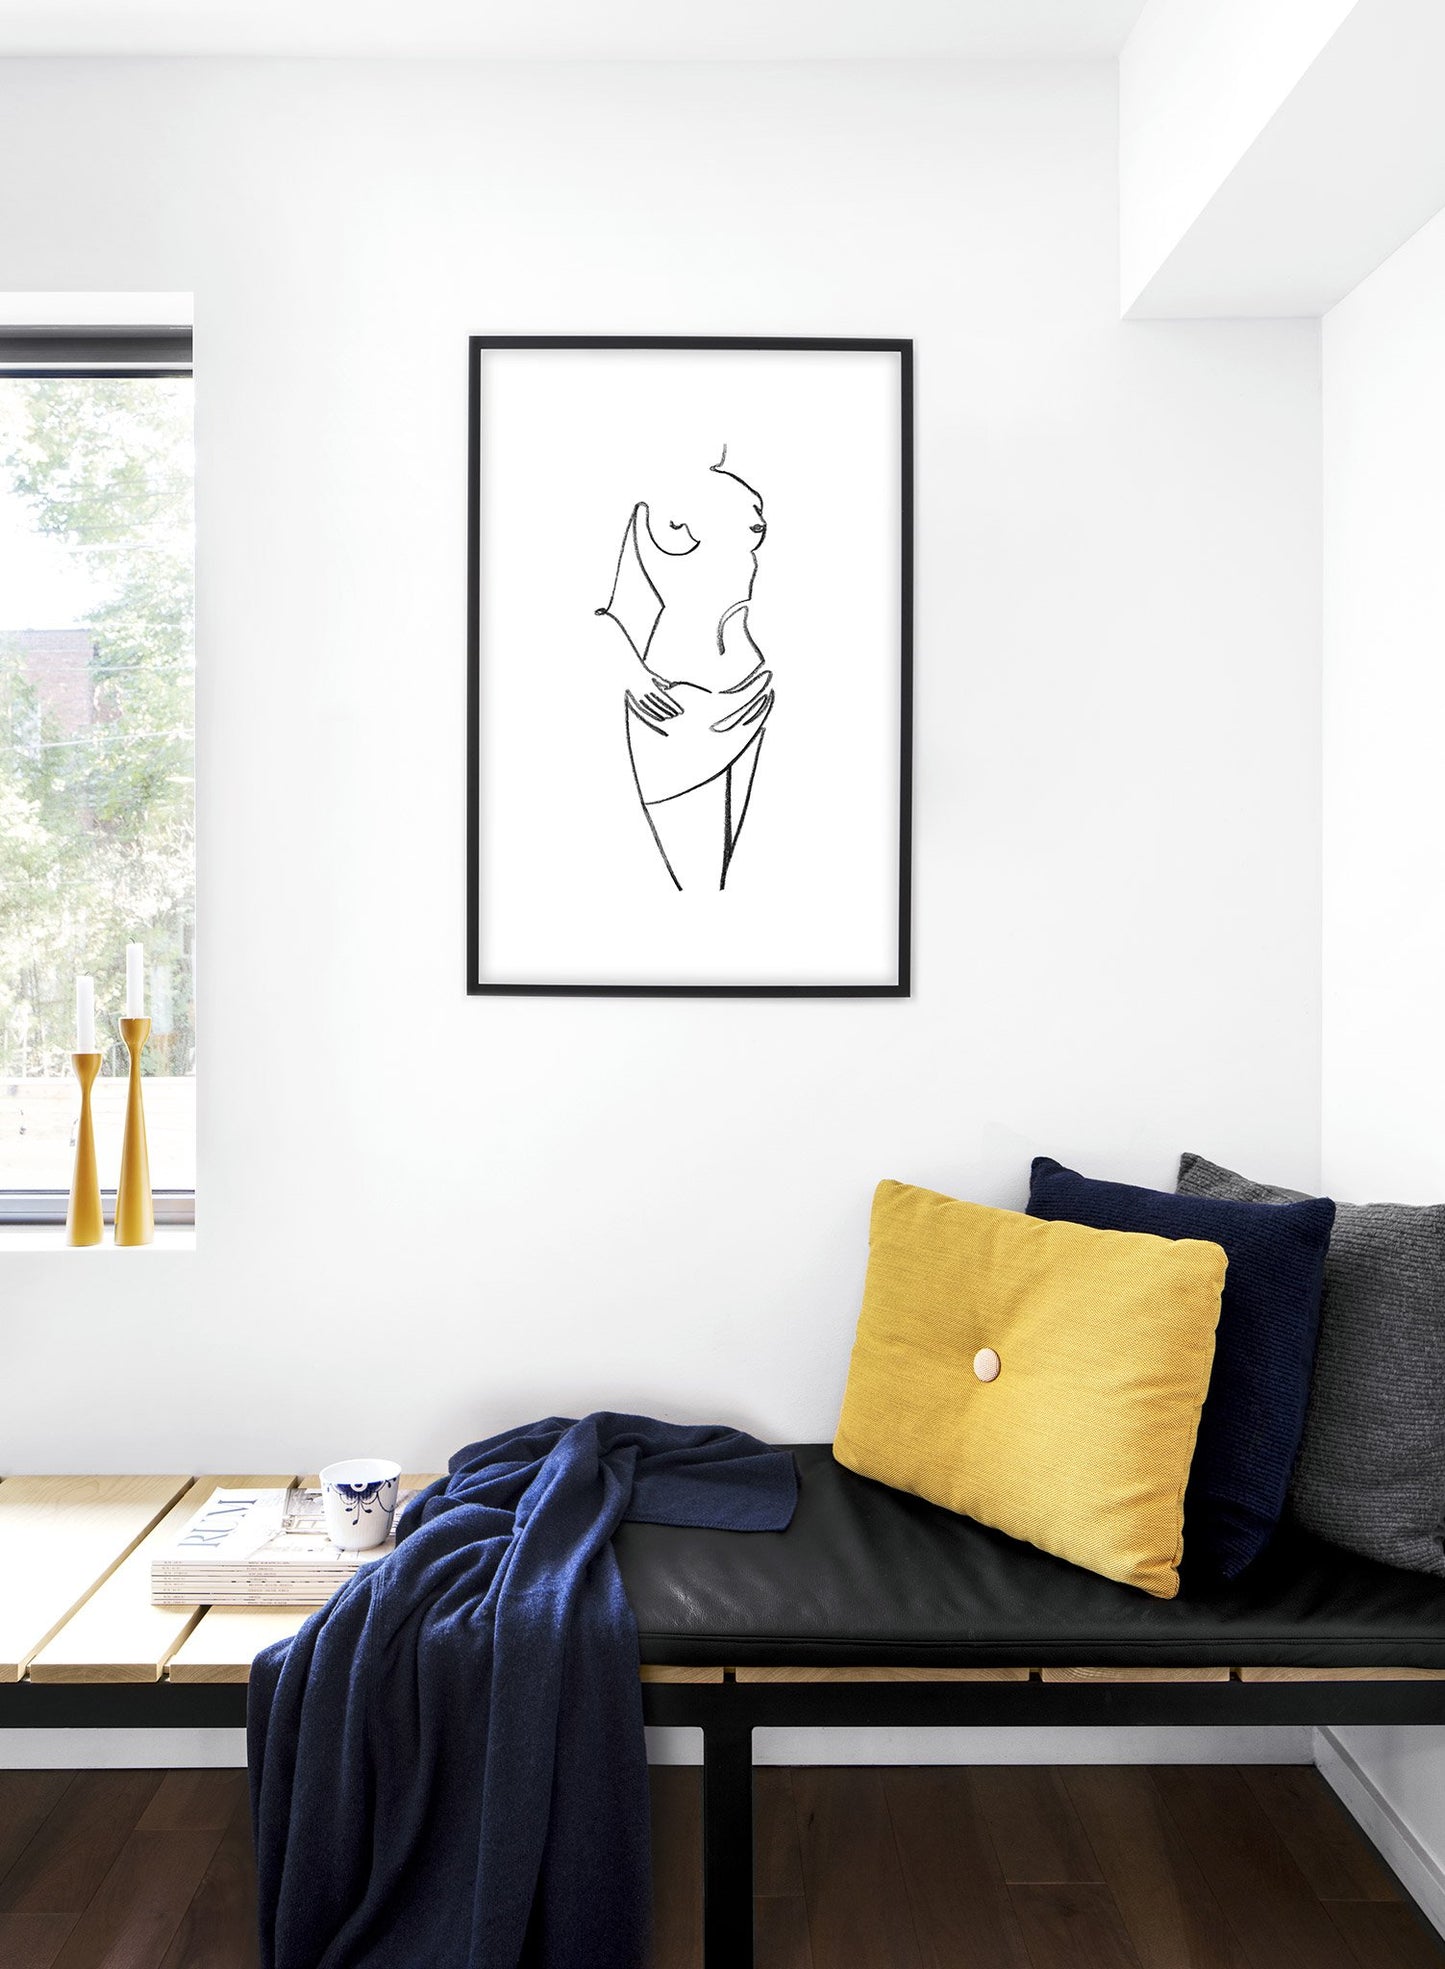 Modern minimalist sketch illustration poster by Opposite Wall - Fresh - Lifestyle - Bedroom